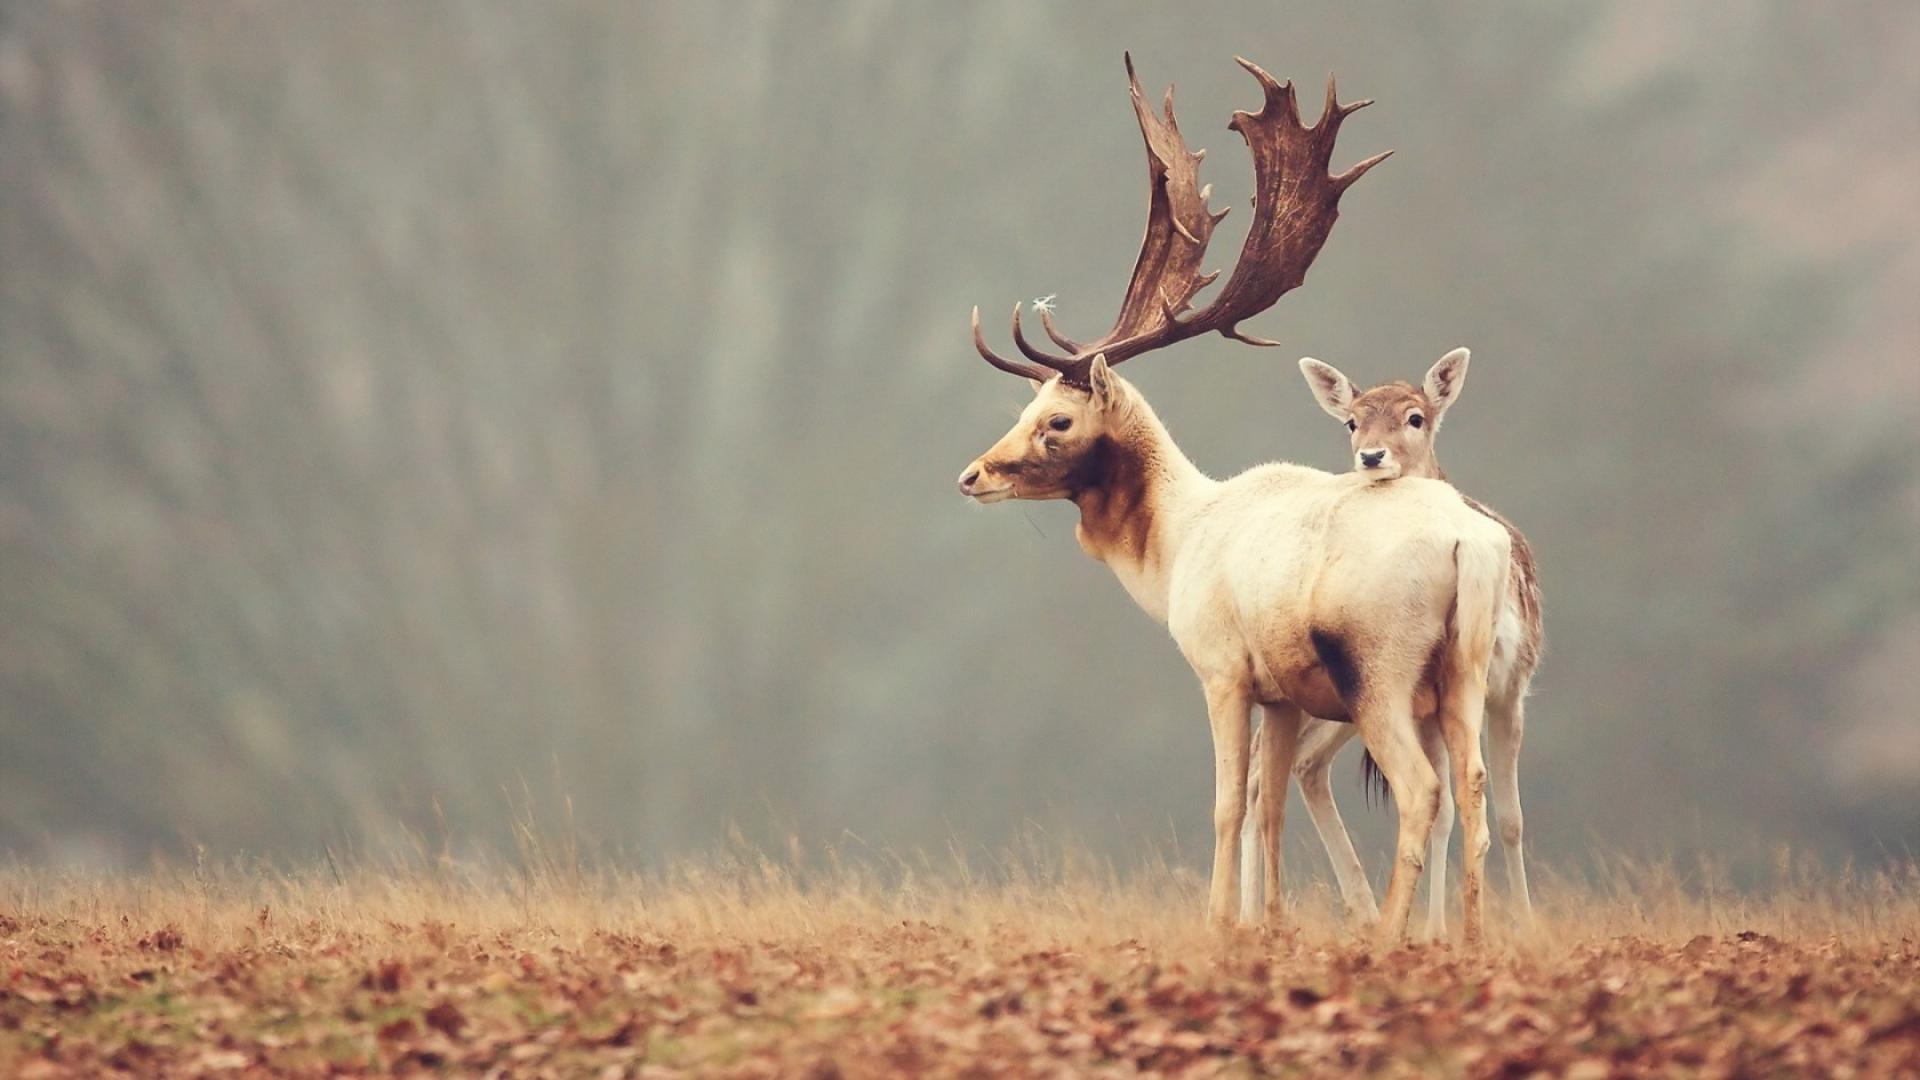 A deer and a fawn in the forest wallpaper - Deer